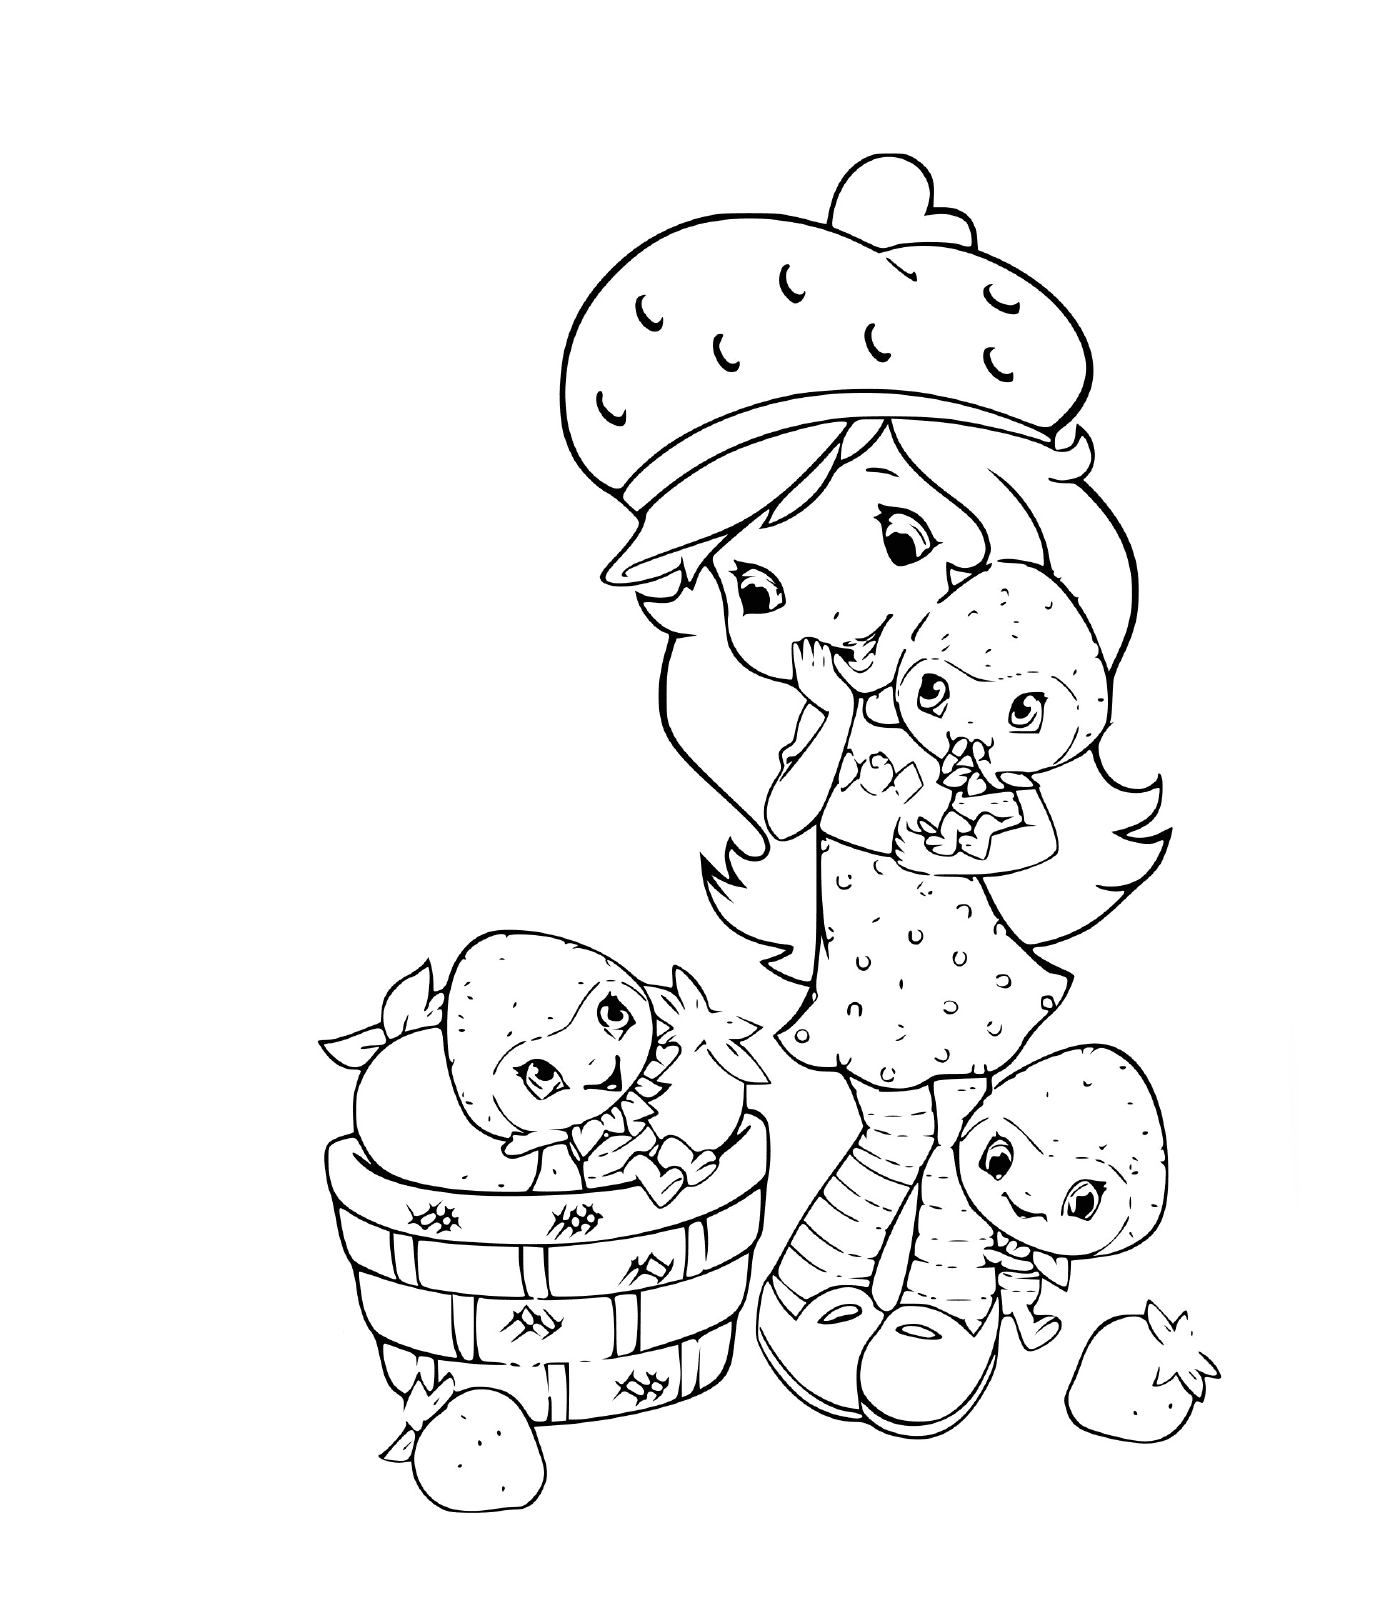  Strawberry, happy strawberry, with her two babies 